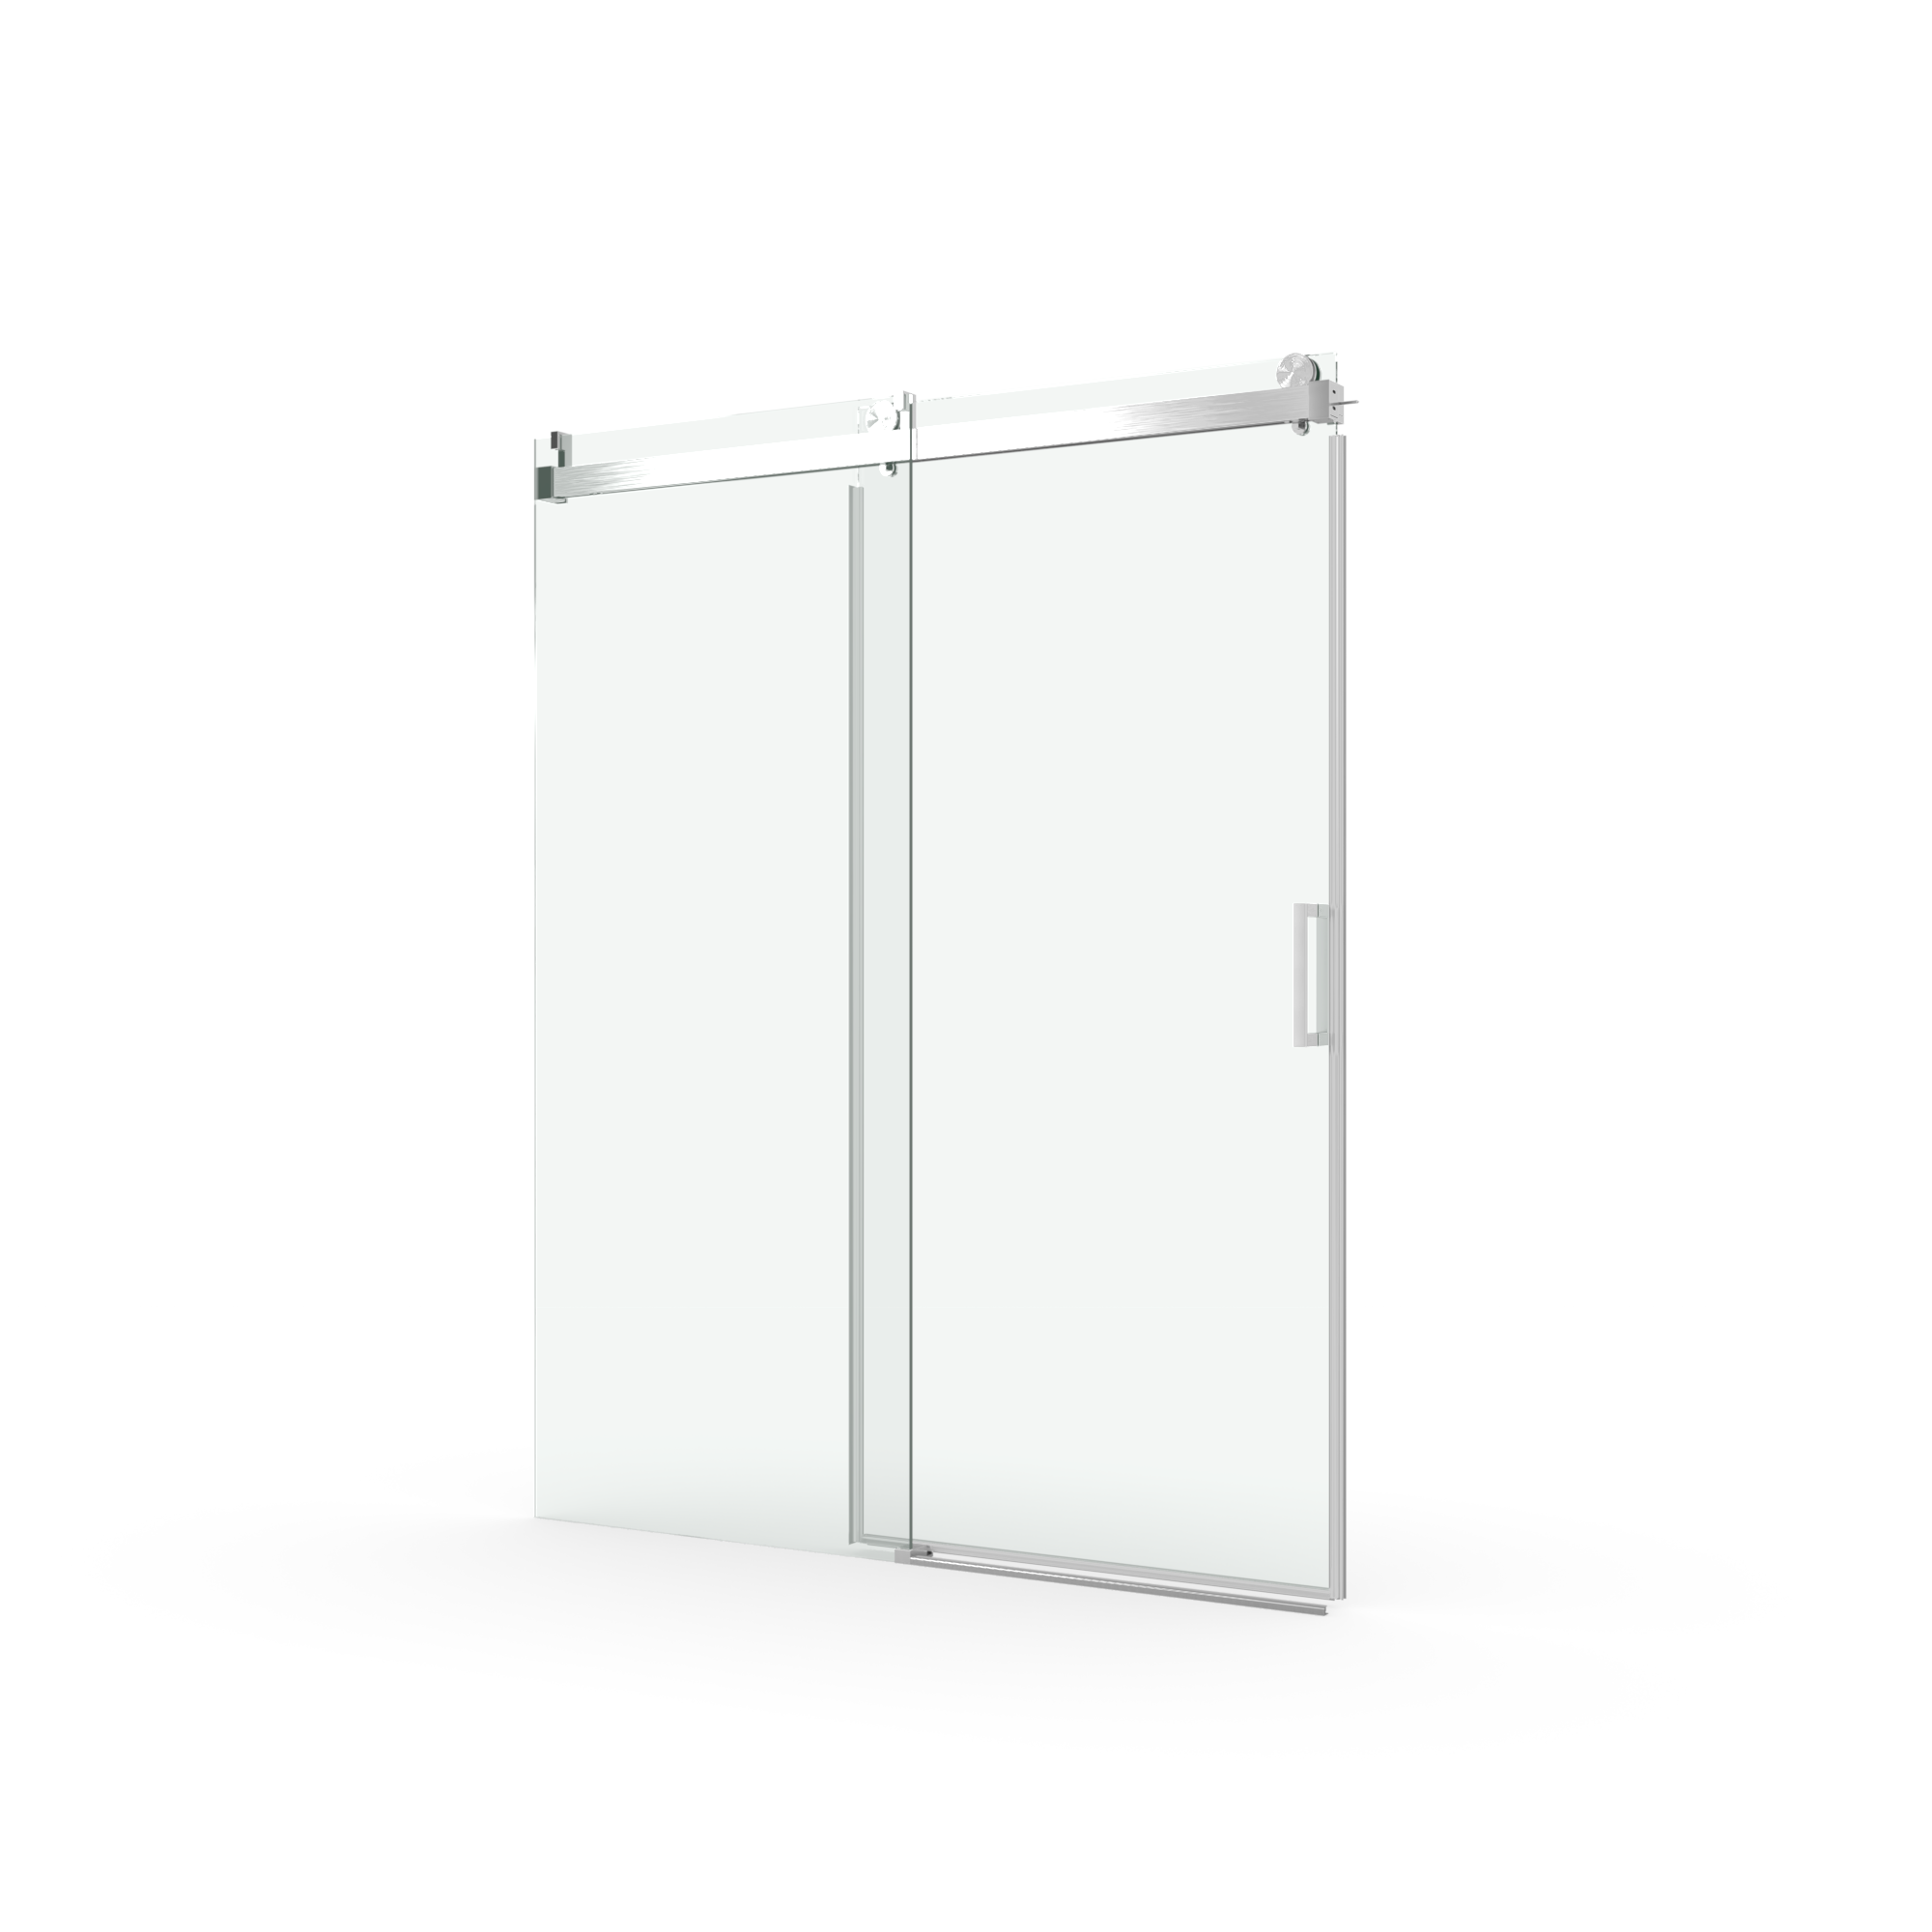 68 to 72 in. W x 76 in. H Sliding Frameless Soft-Close Shower Door with Premium 3/8 Inch